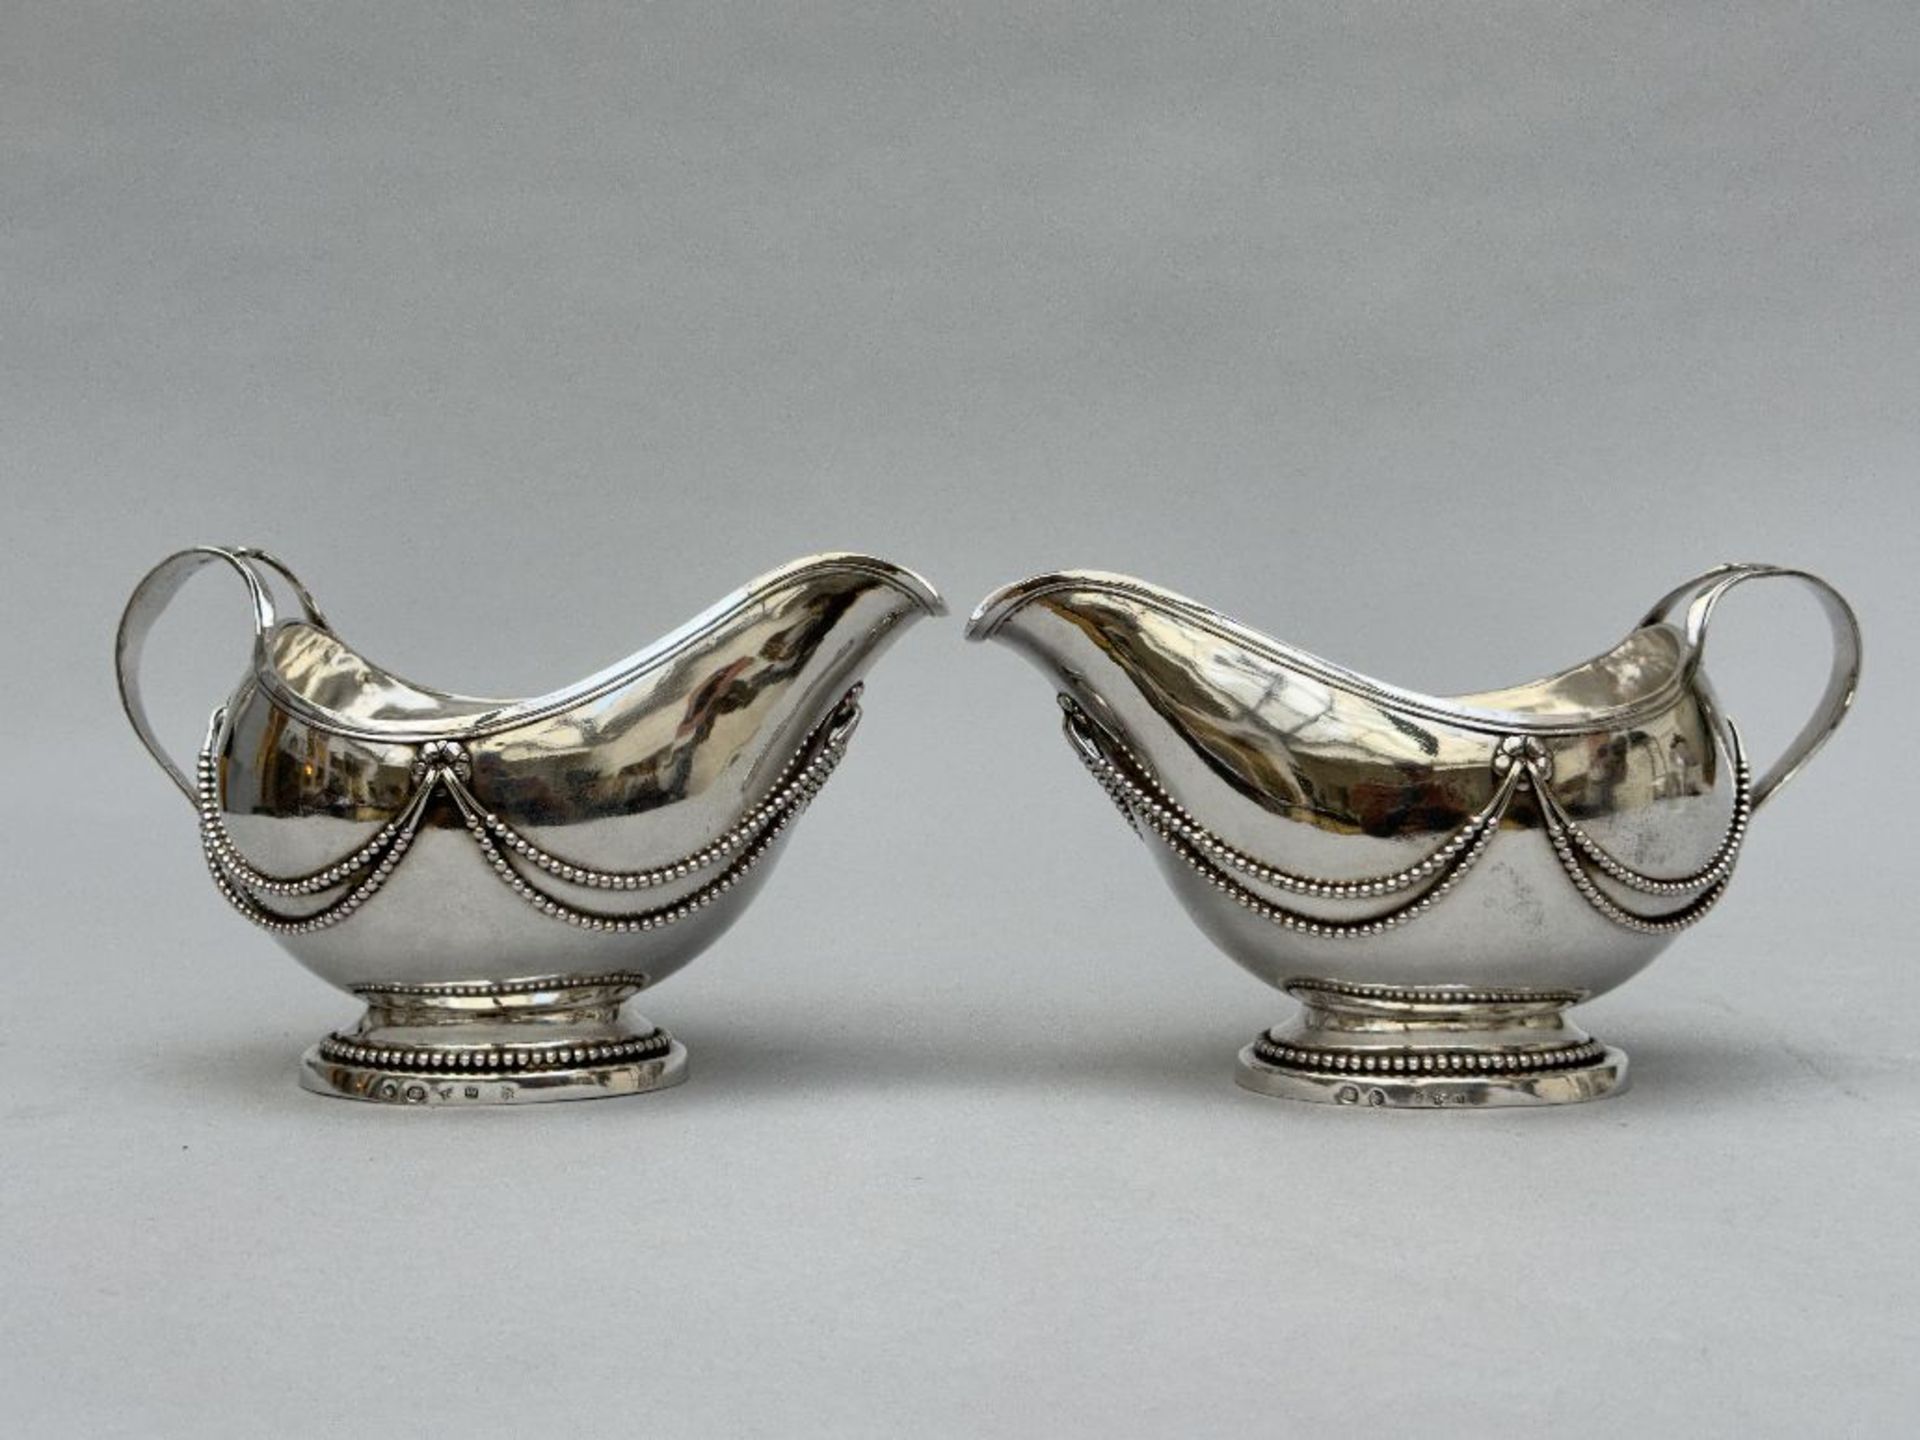 A pair of silver sauce boats by Nicolaes Vleeshouwers, Antwerp 1792 - Image 7 of 9